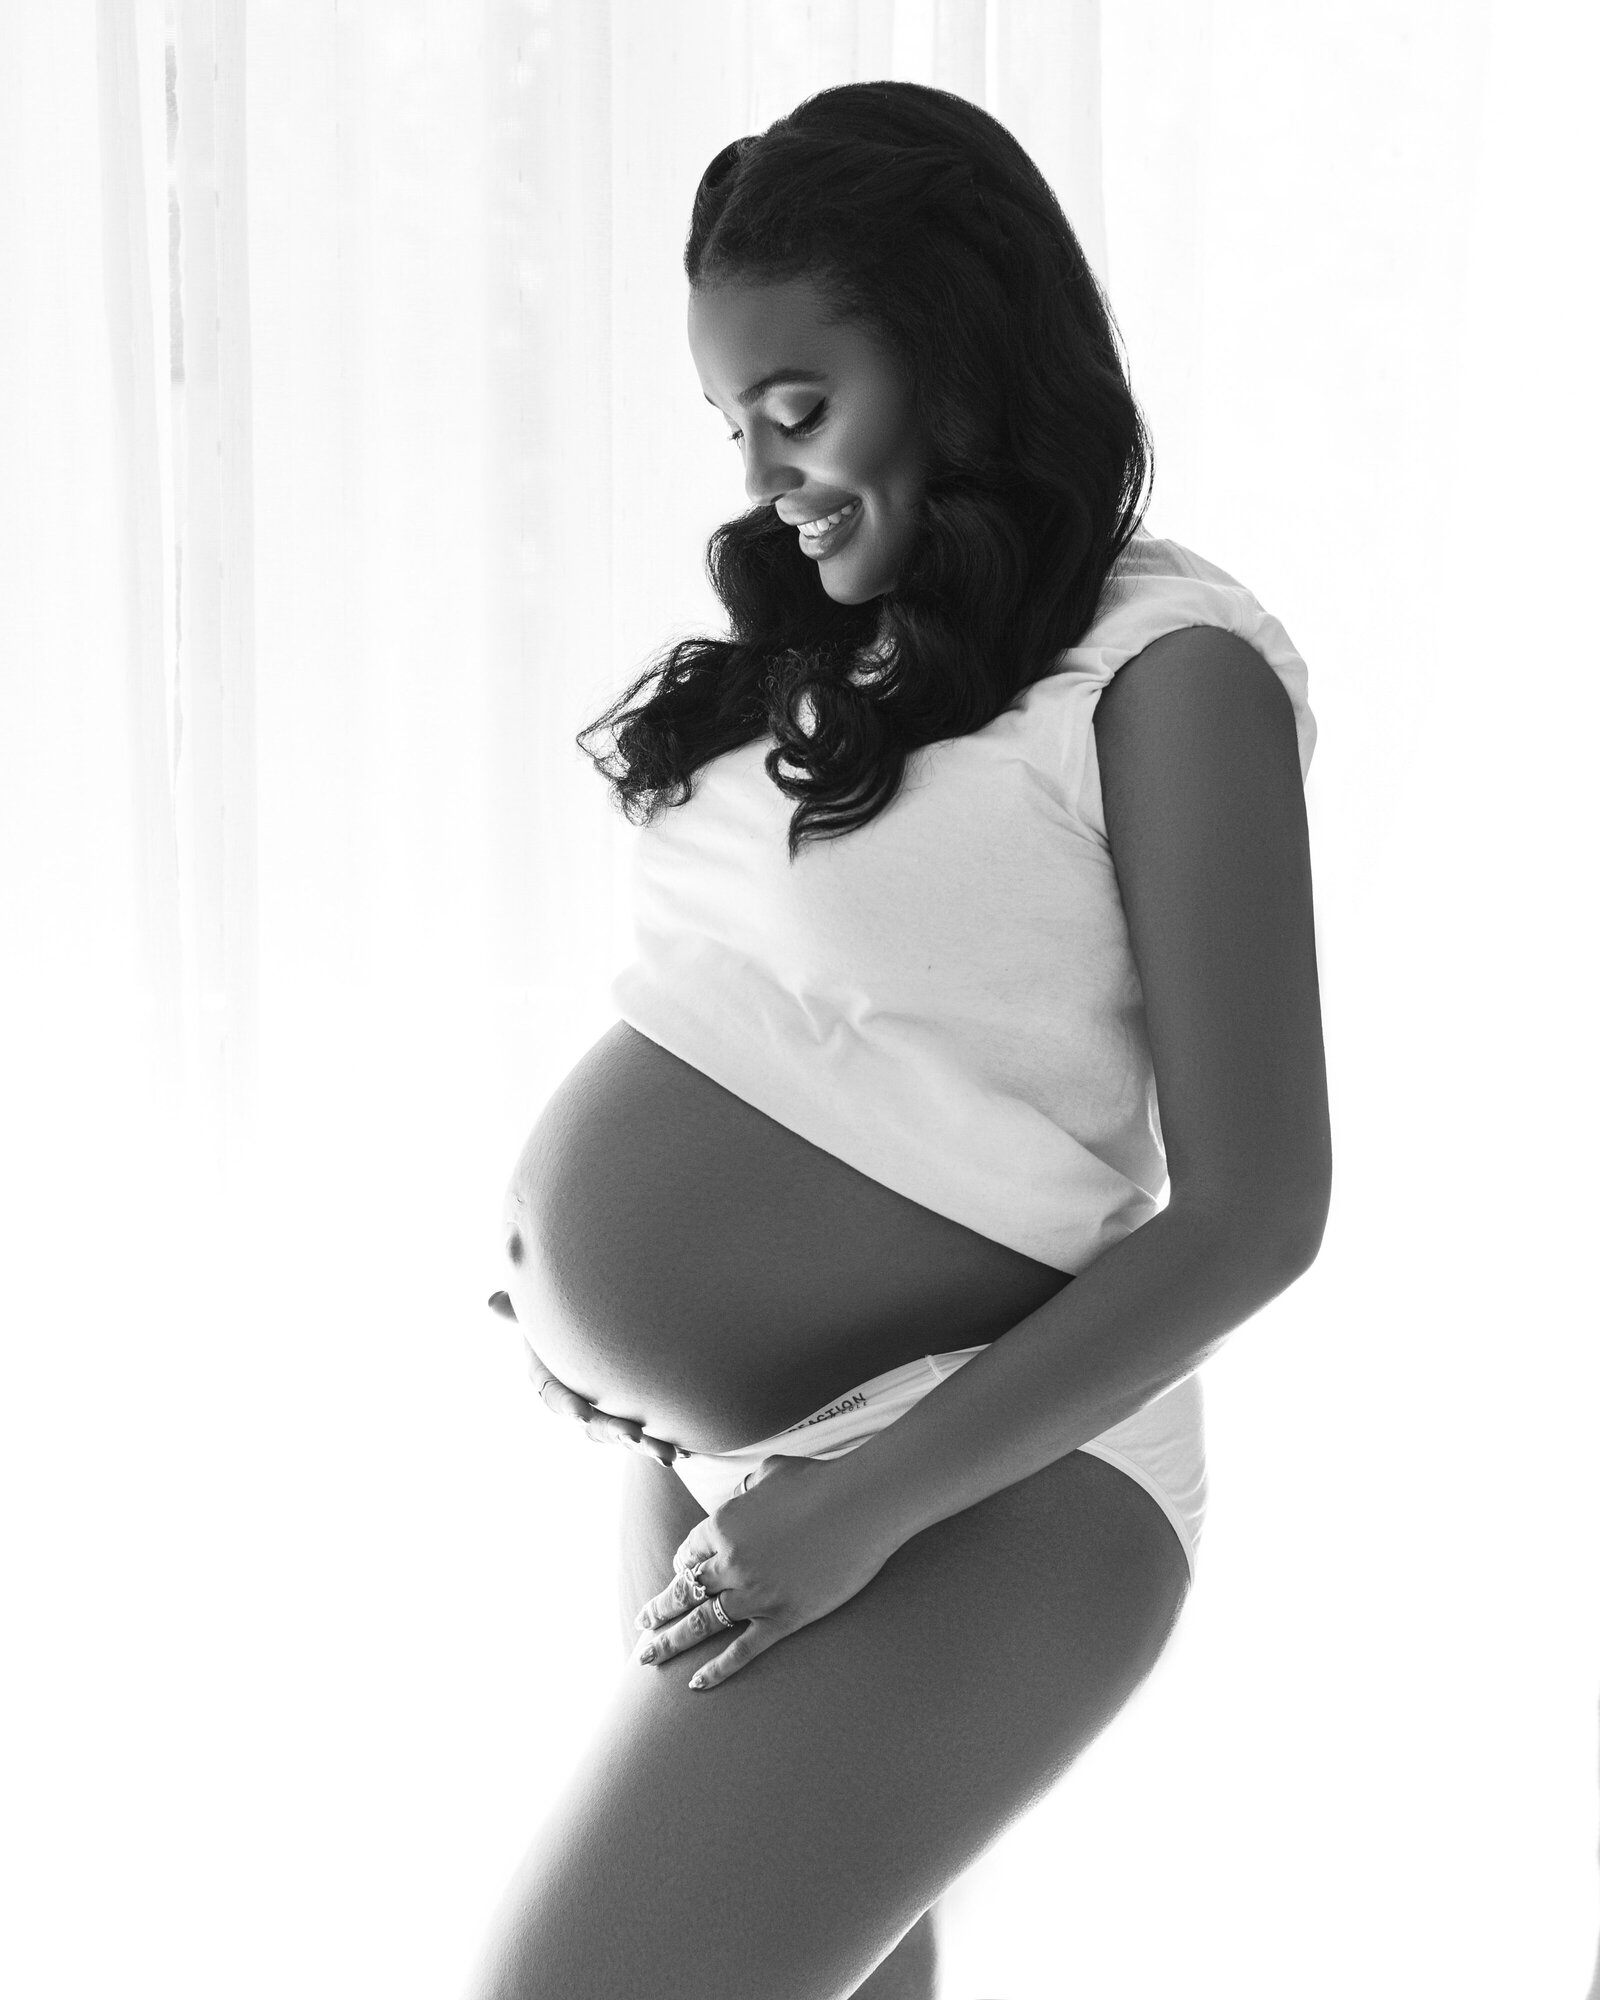 High key maternity photography by Daisy Rey in New Jersey